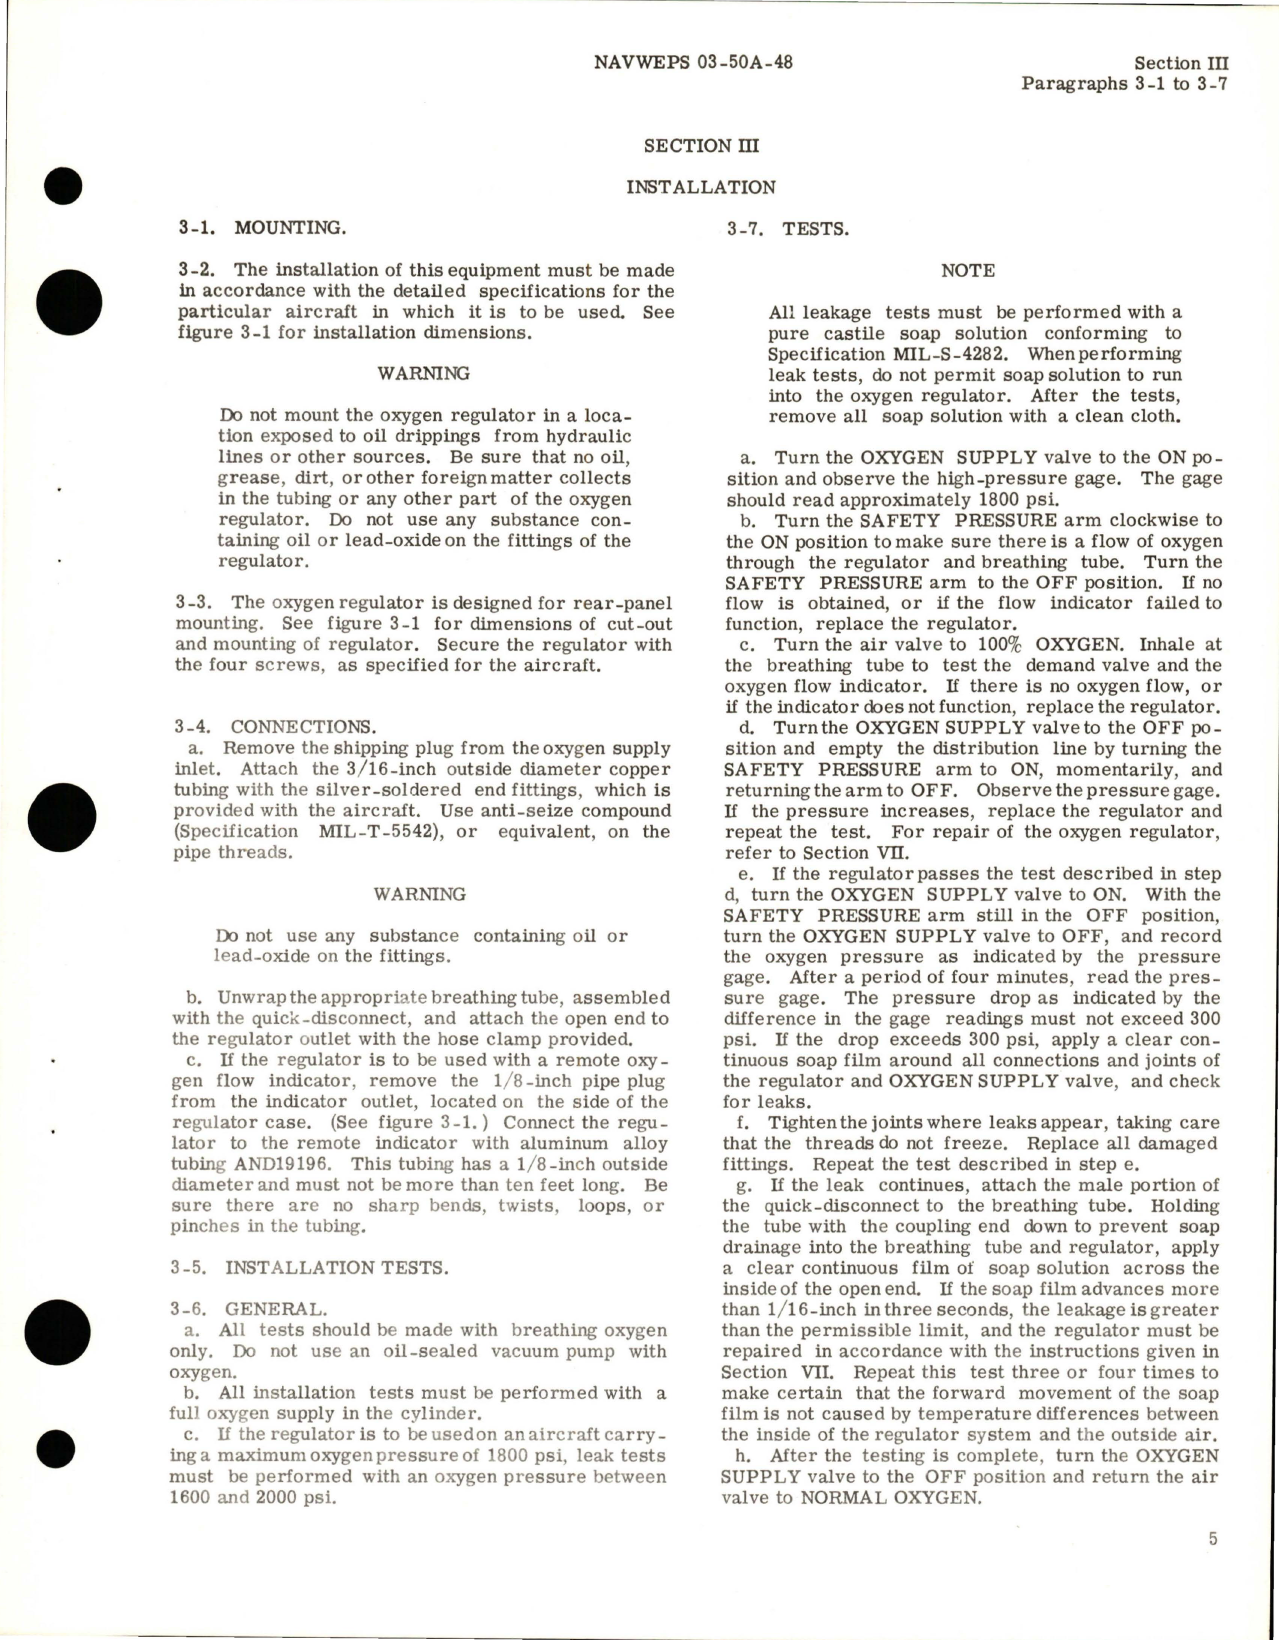 Sample page 9 from AirCorps Library document: Operation, Maintenance, and Overhaul Instructions for Diluter Demand Oxygen Regulator - Part 2867-B2, 2867-7B-C1, 2872-B2, 2873-B32, and 2874-B2